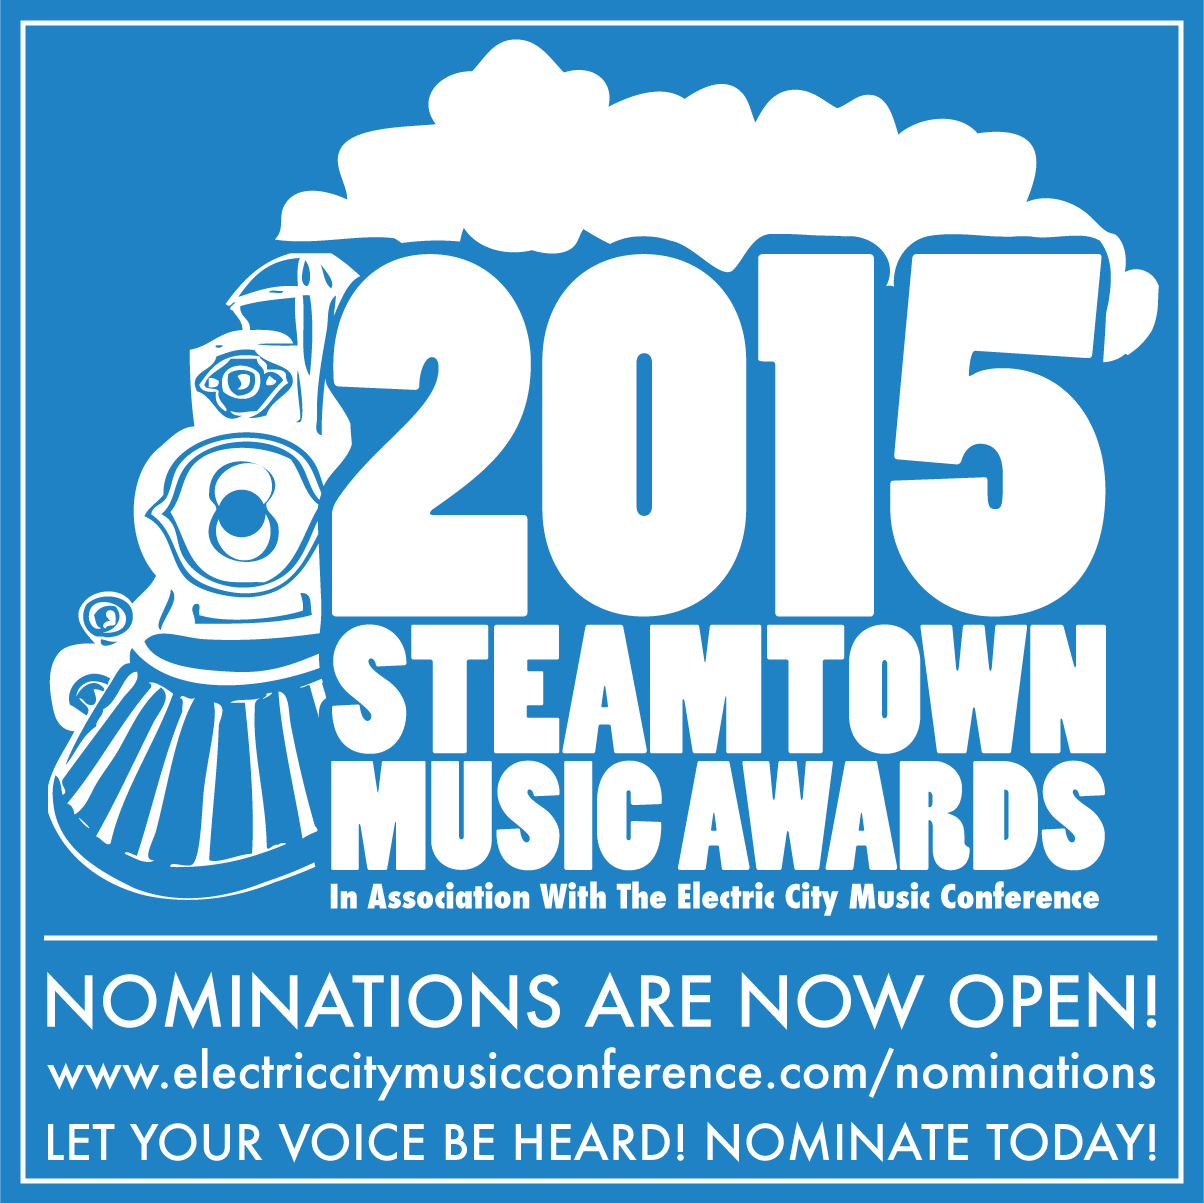 STEAMTOWN MUSIC AWARDS 2015 OPENS NOMINATIONS